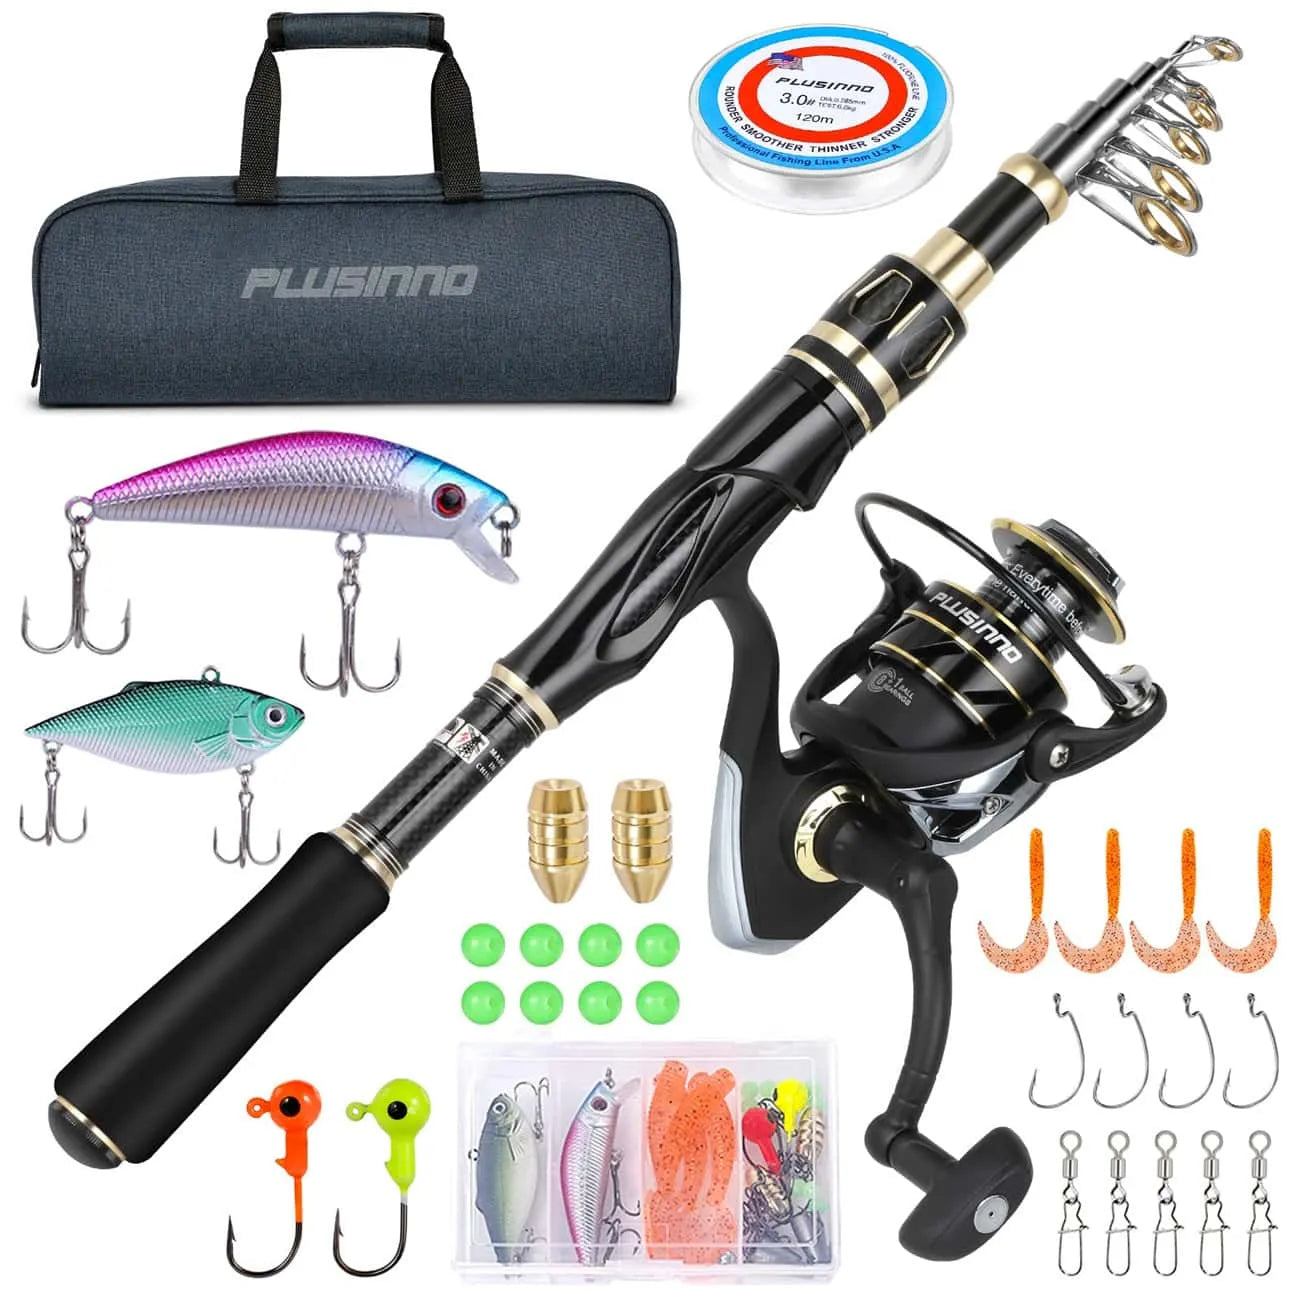 PLUSINNO Eagle Hunting VIII Fishing Rod and Reel Combos Set with Carrier Case